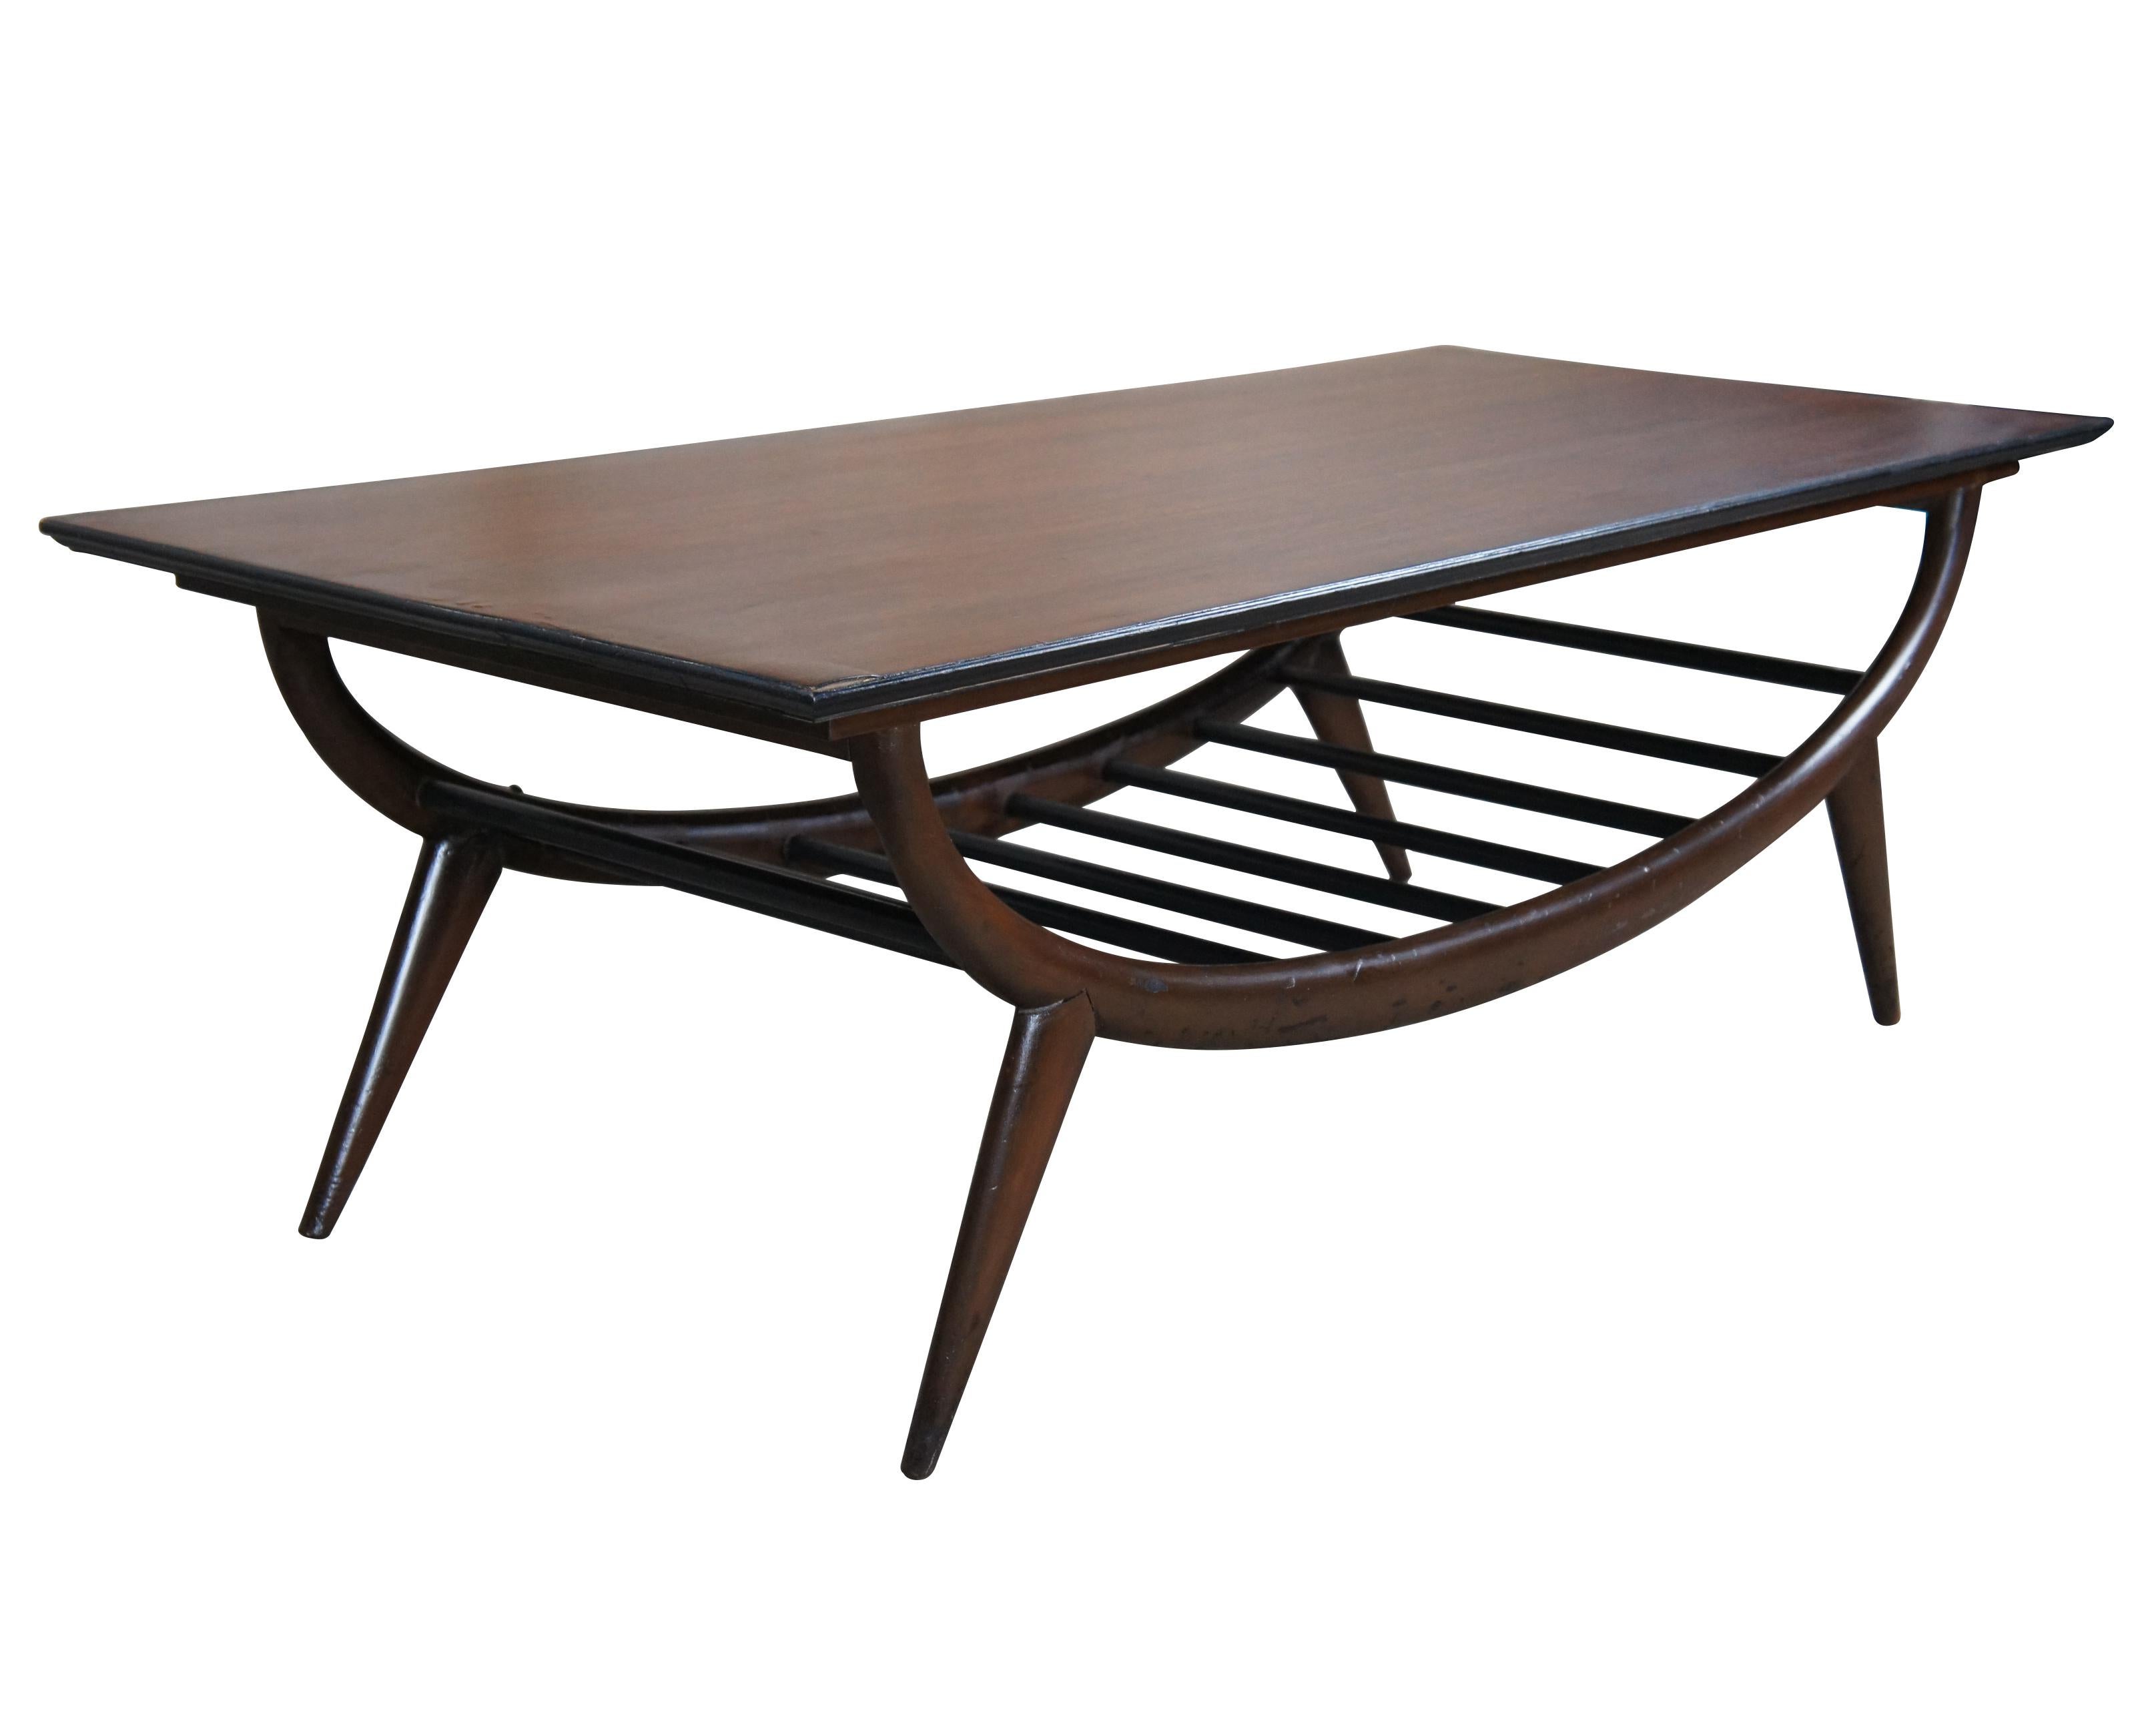 An impressive Mid Century Modern coffee table. Features a sculptural oak form with an open slatted base and tapered peg legs. Marked along underside 20529. 54